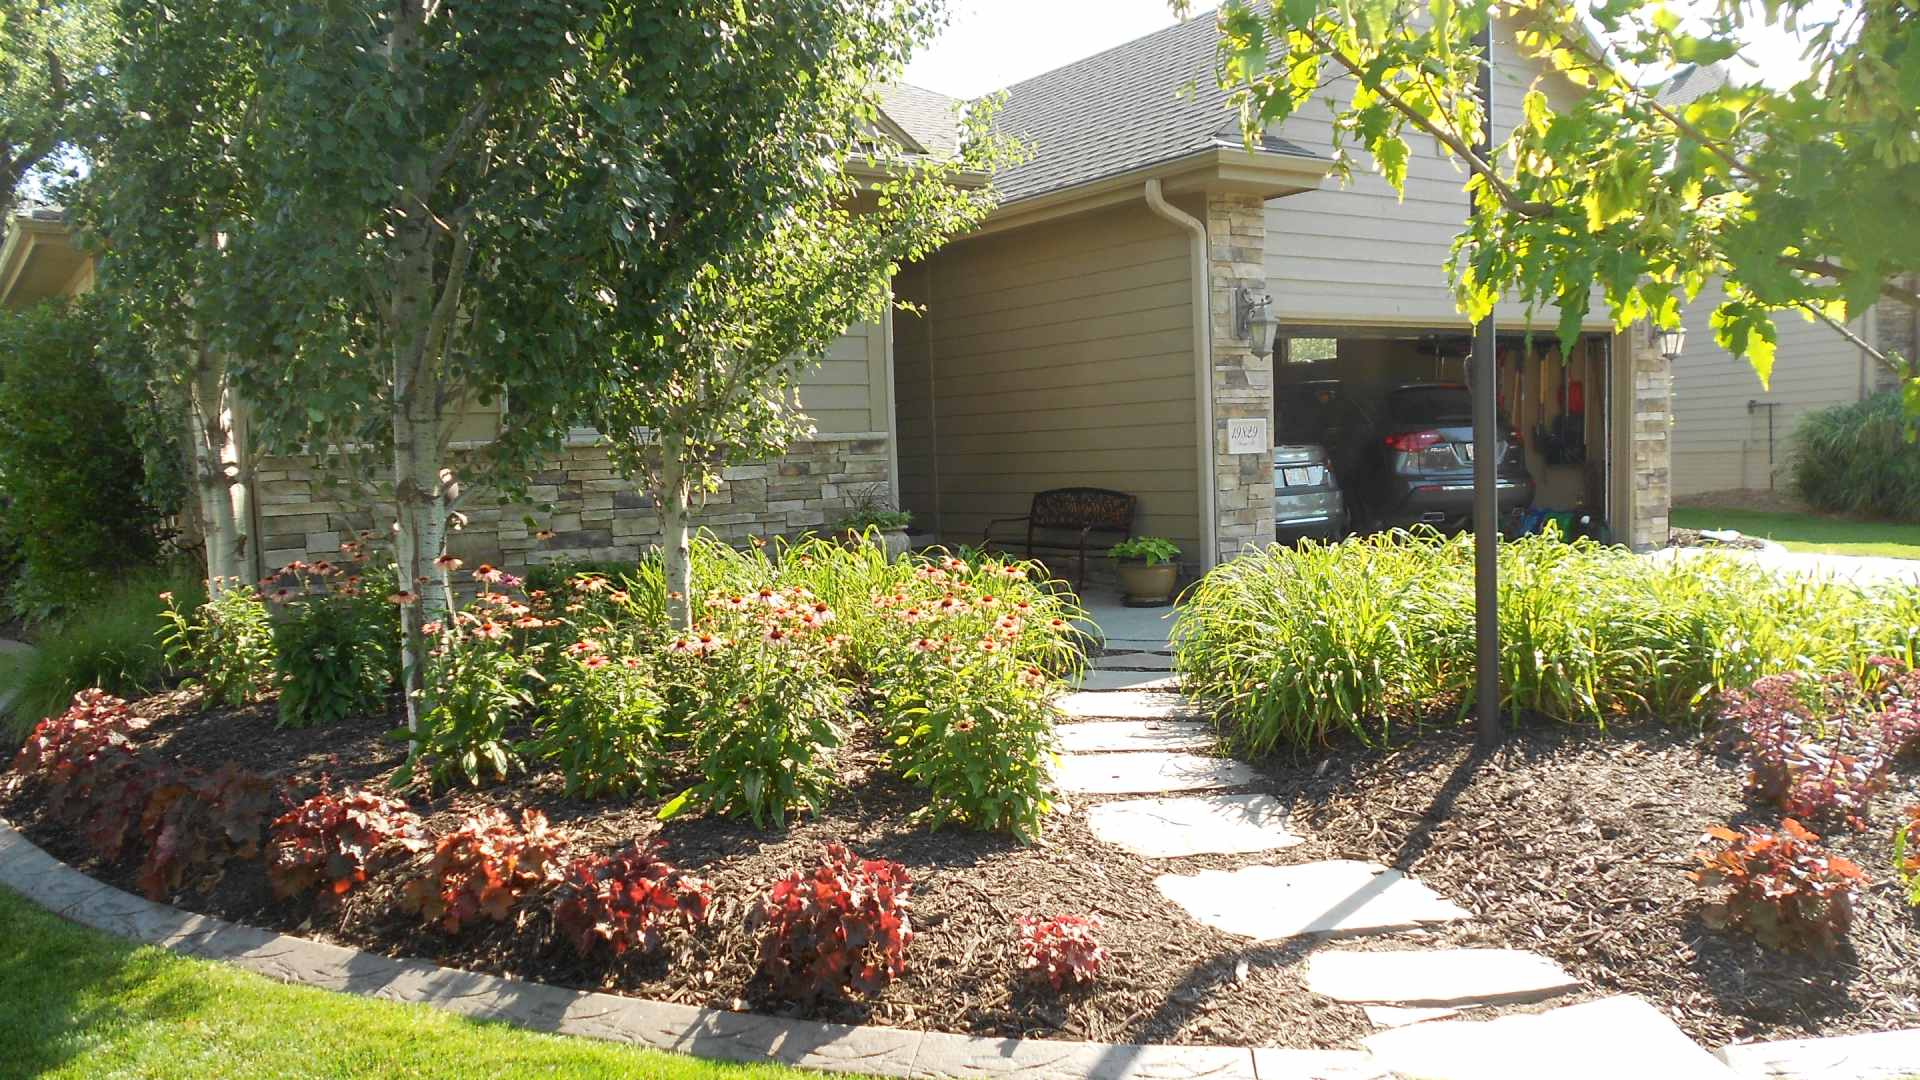 Home front with landscaping installed and walkway to yard in Ralston, NE.